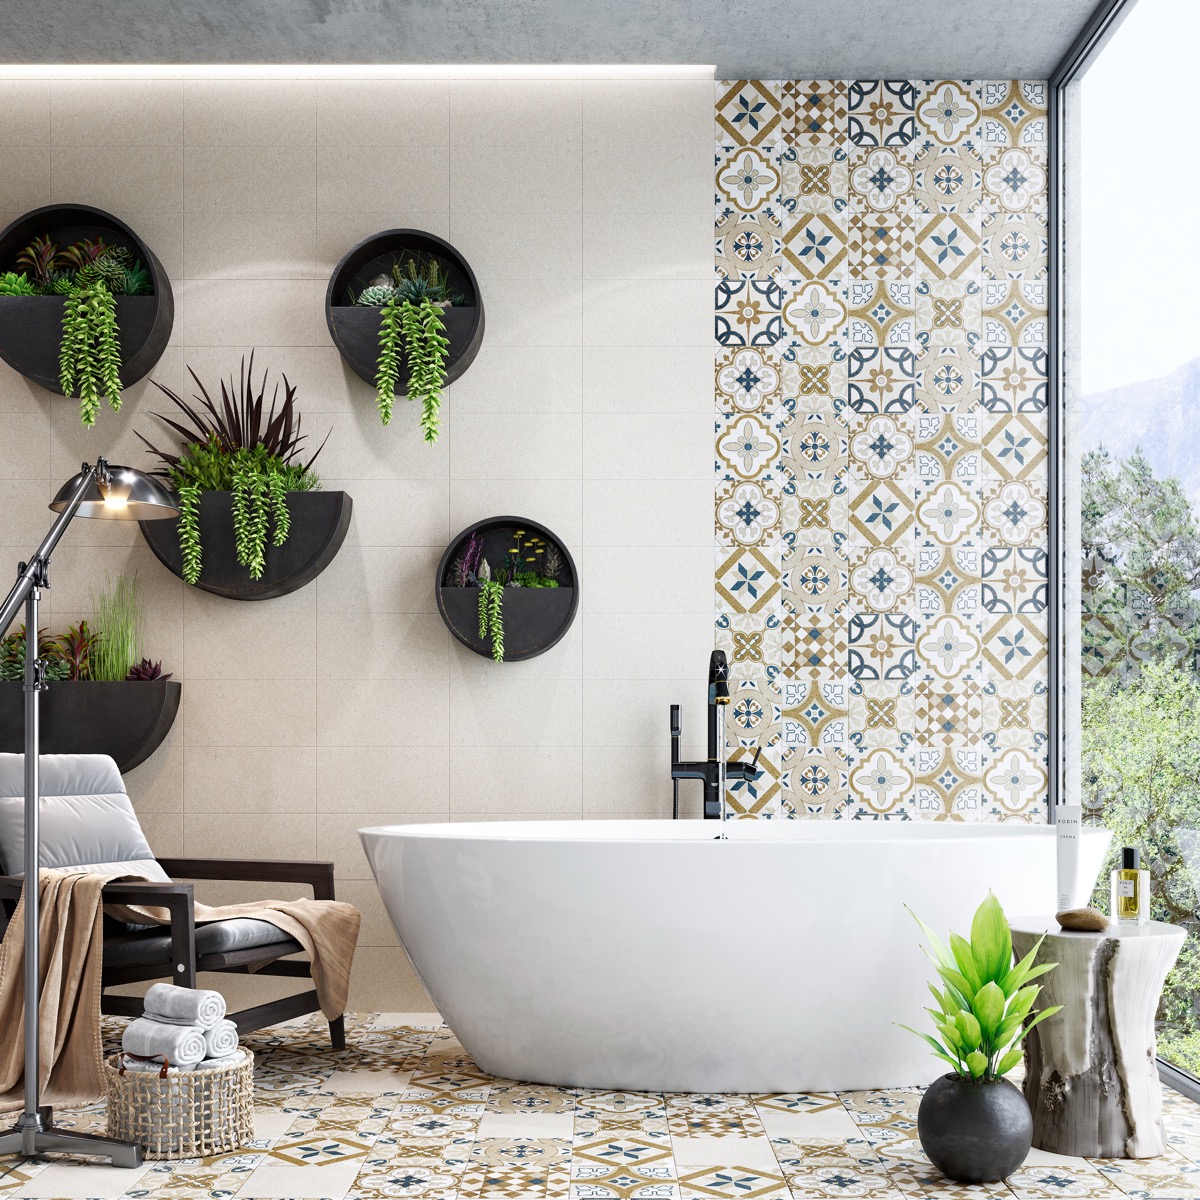 House & Home - 10 Bathroom Design Ideas To Try In 2023